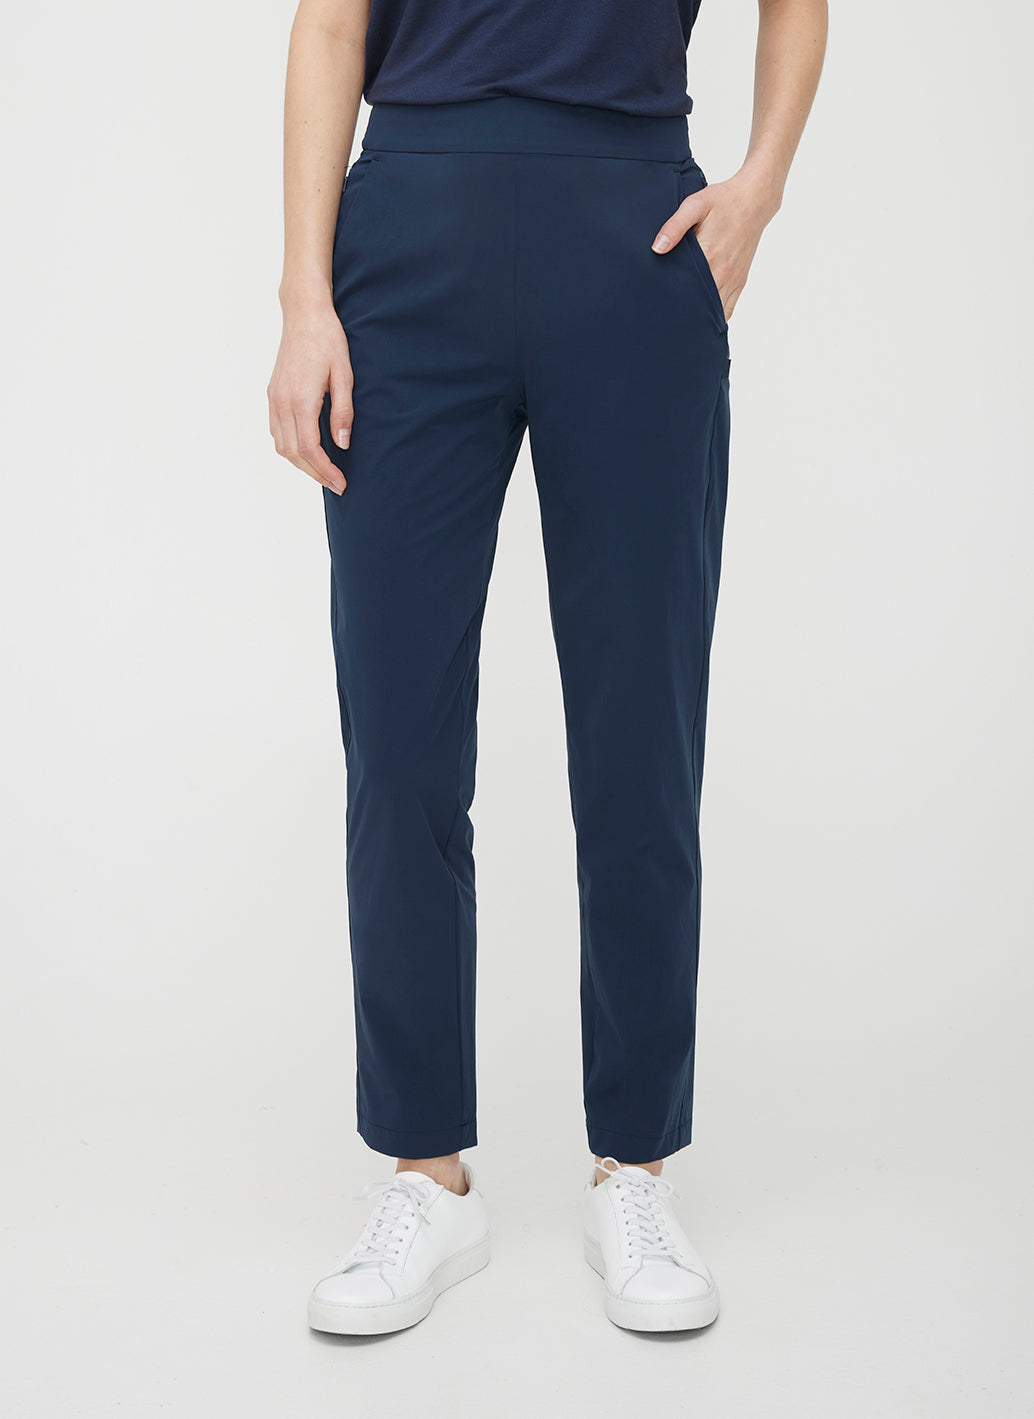 Kit and Ace — Chloe Everyday Pants